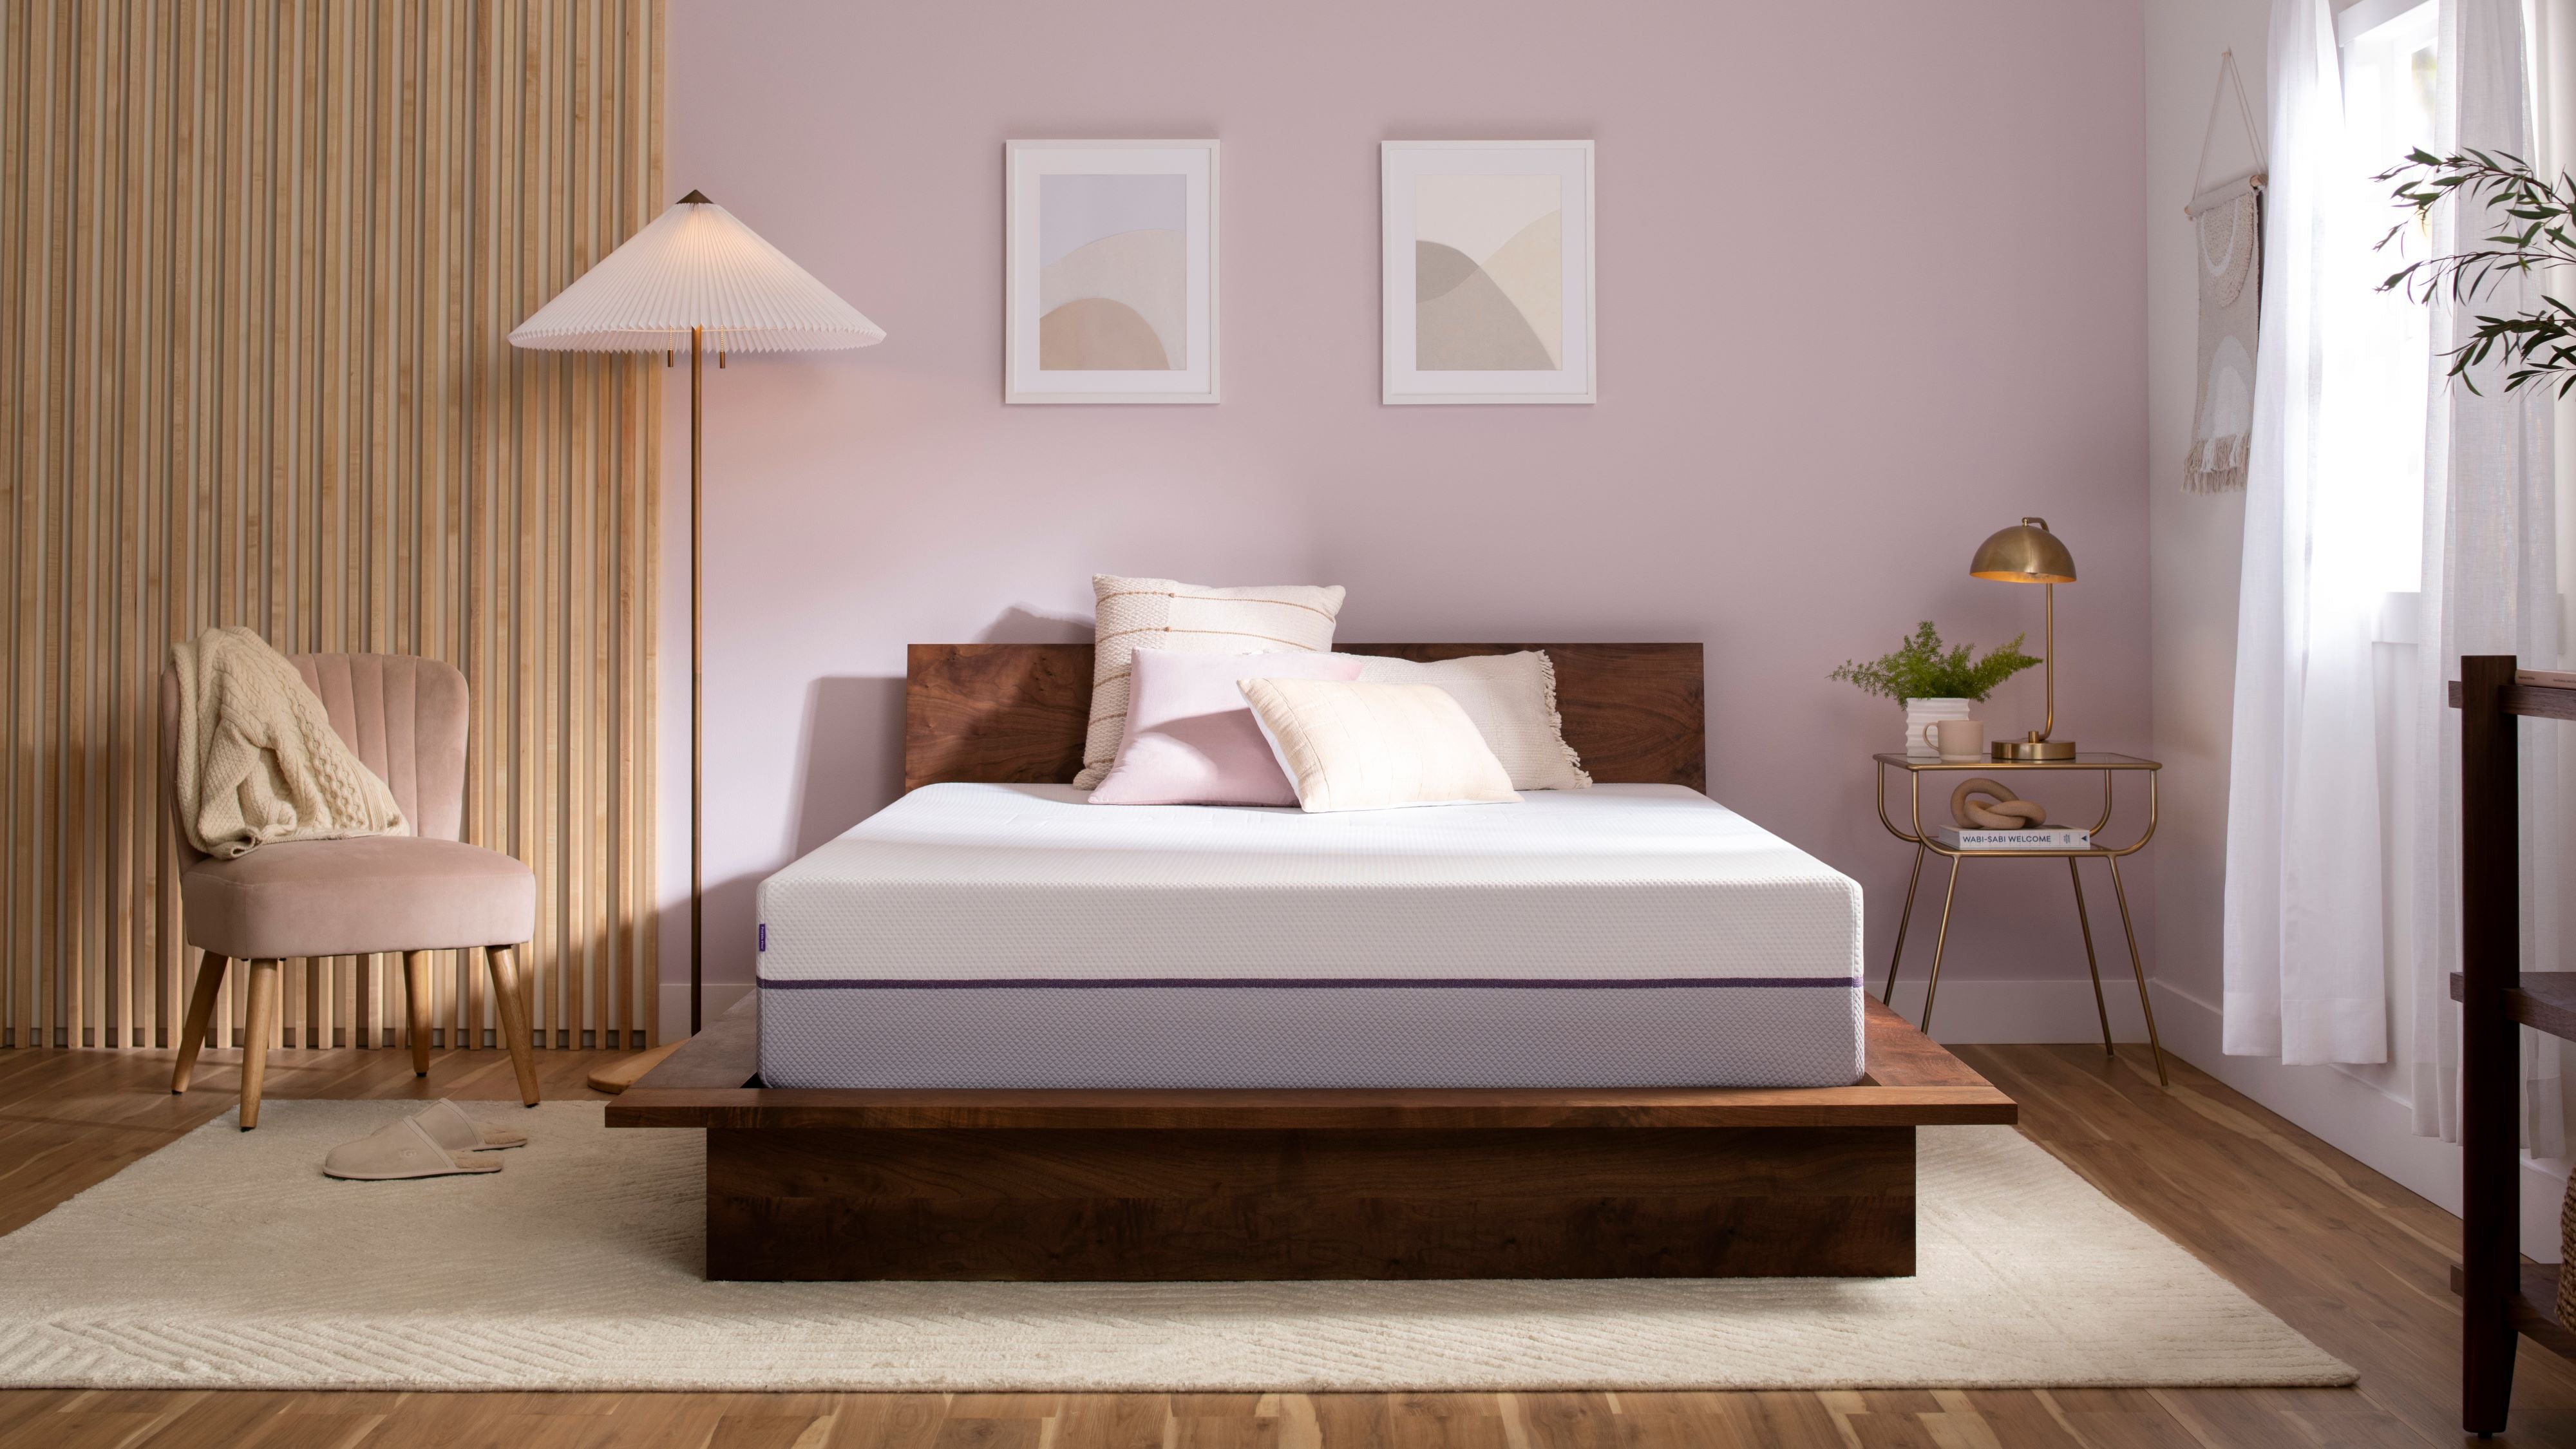 Purple Plus Mattress in a beautiful room seen from the front